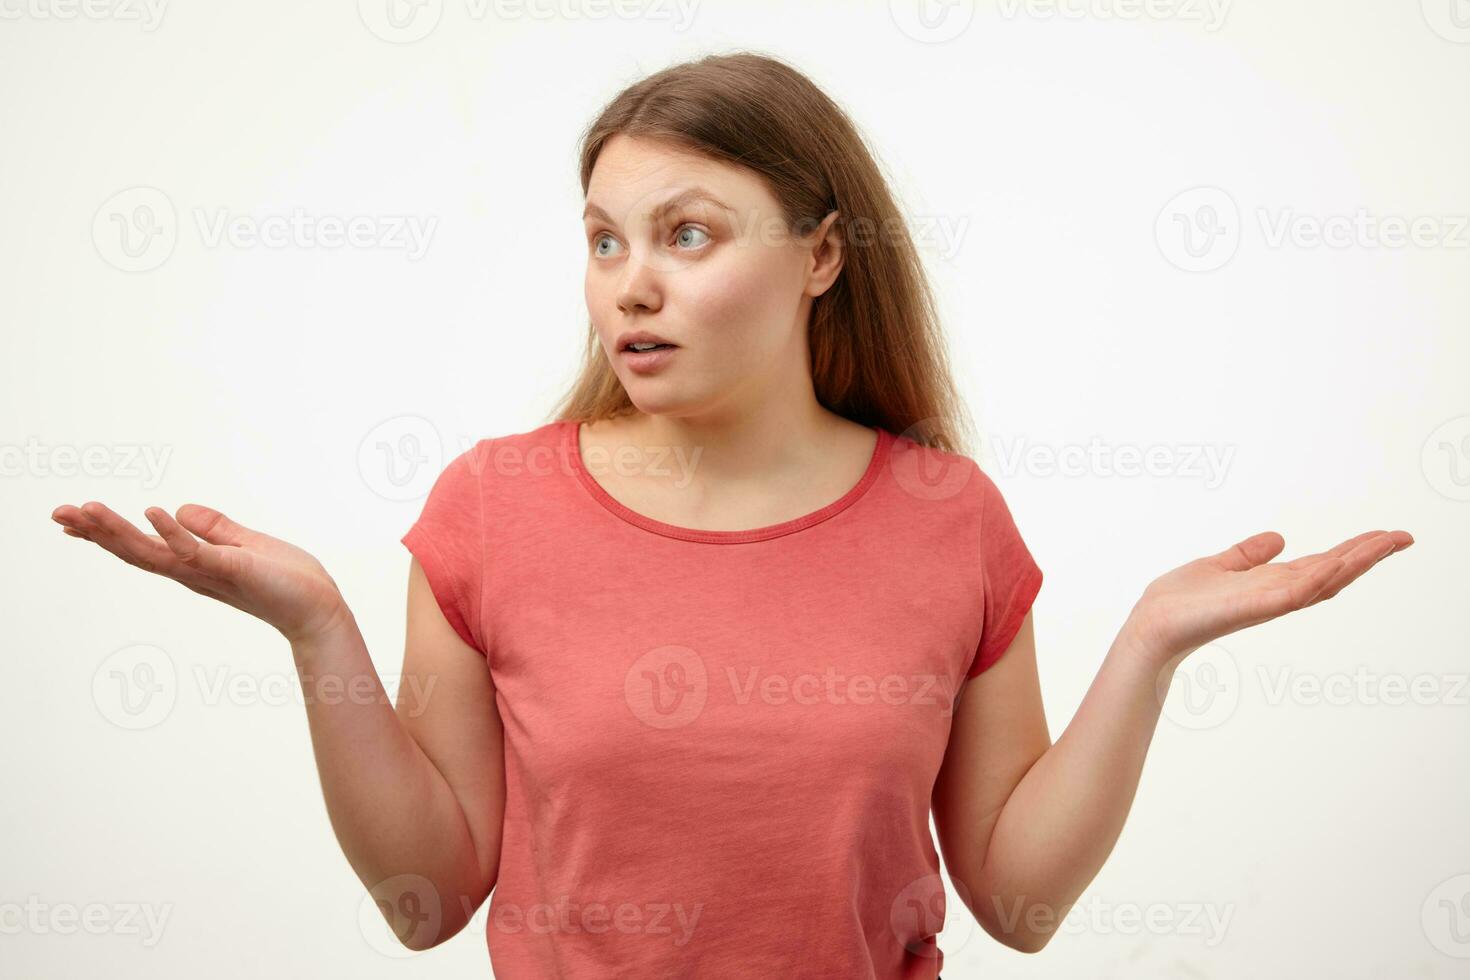 Bewildered young blonde woman with natural makeup looking wonderingly aside and keeping palms raised while standing over white background in pink t-shirt photo